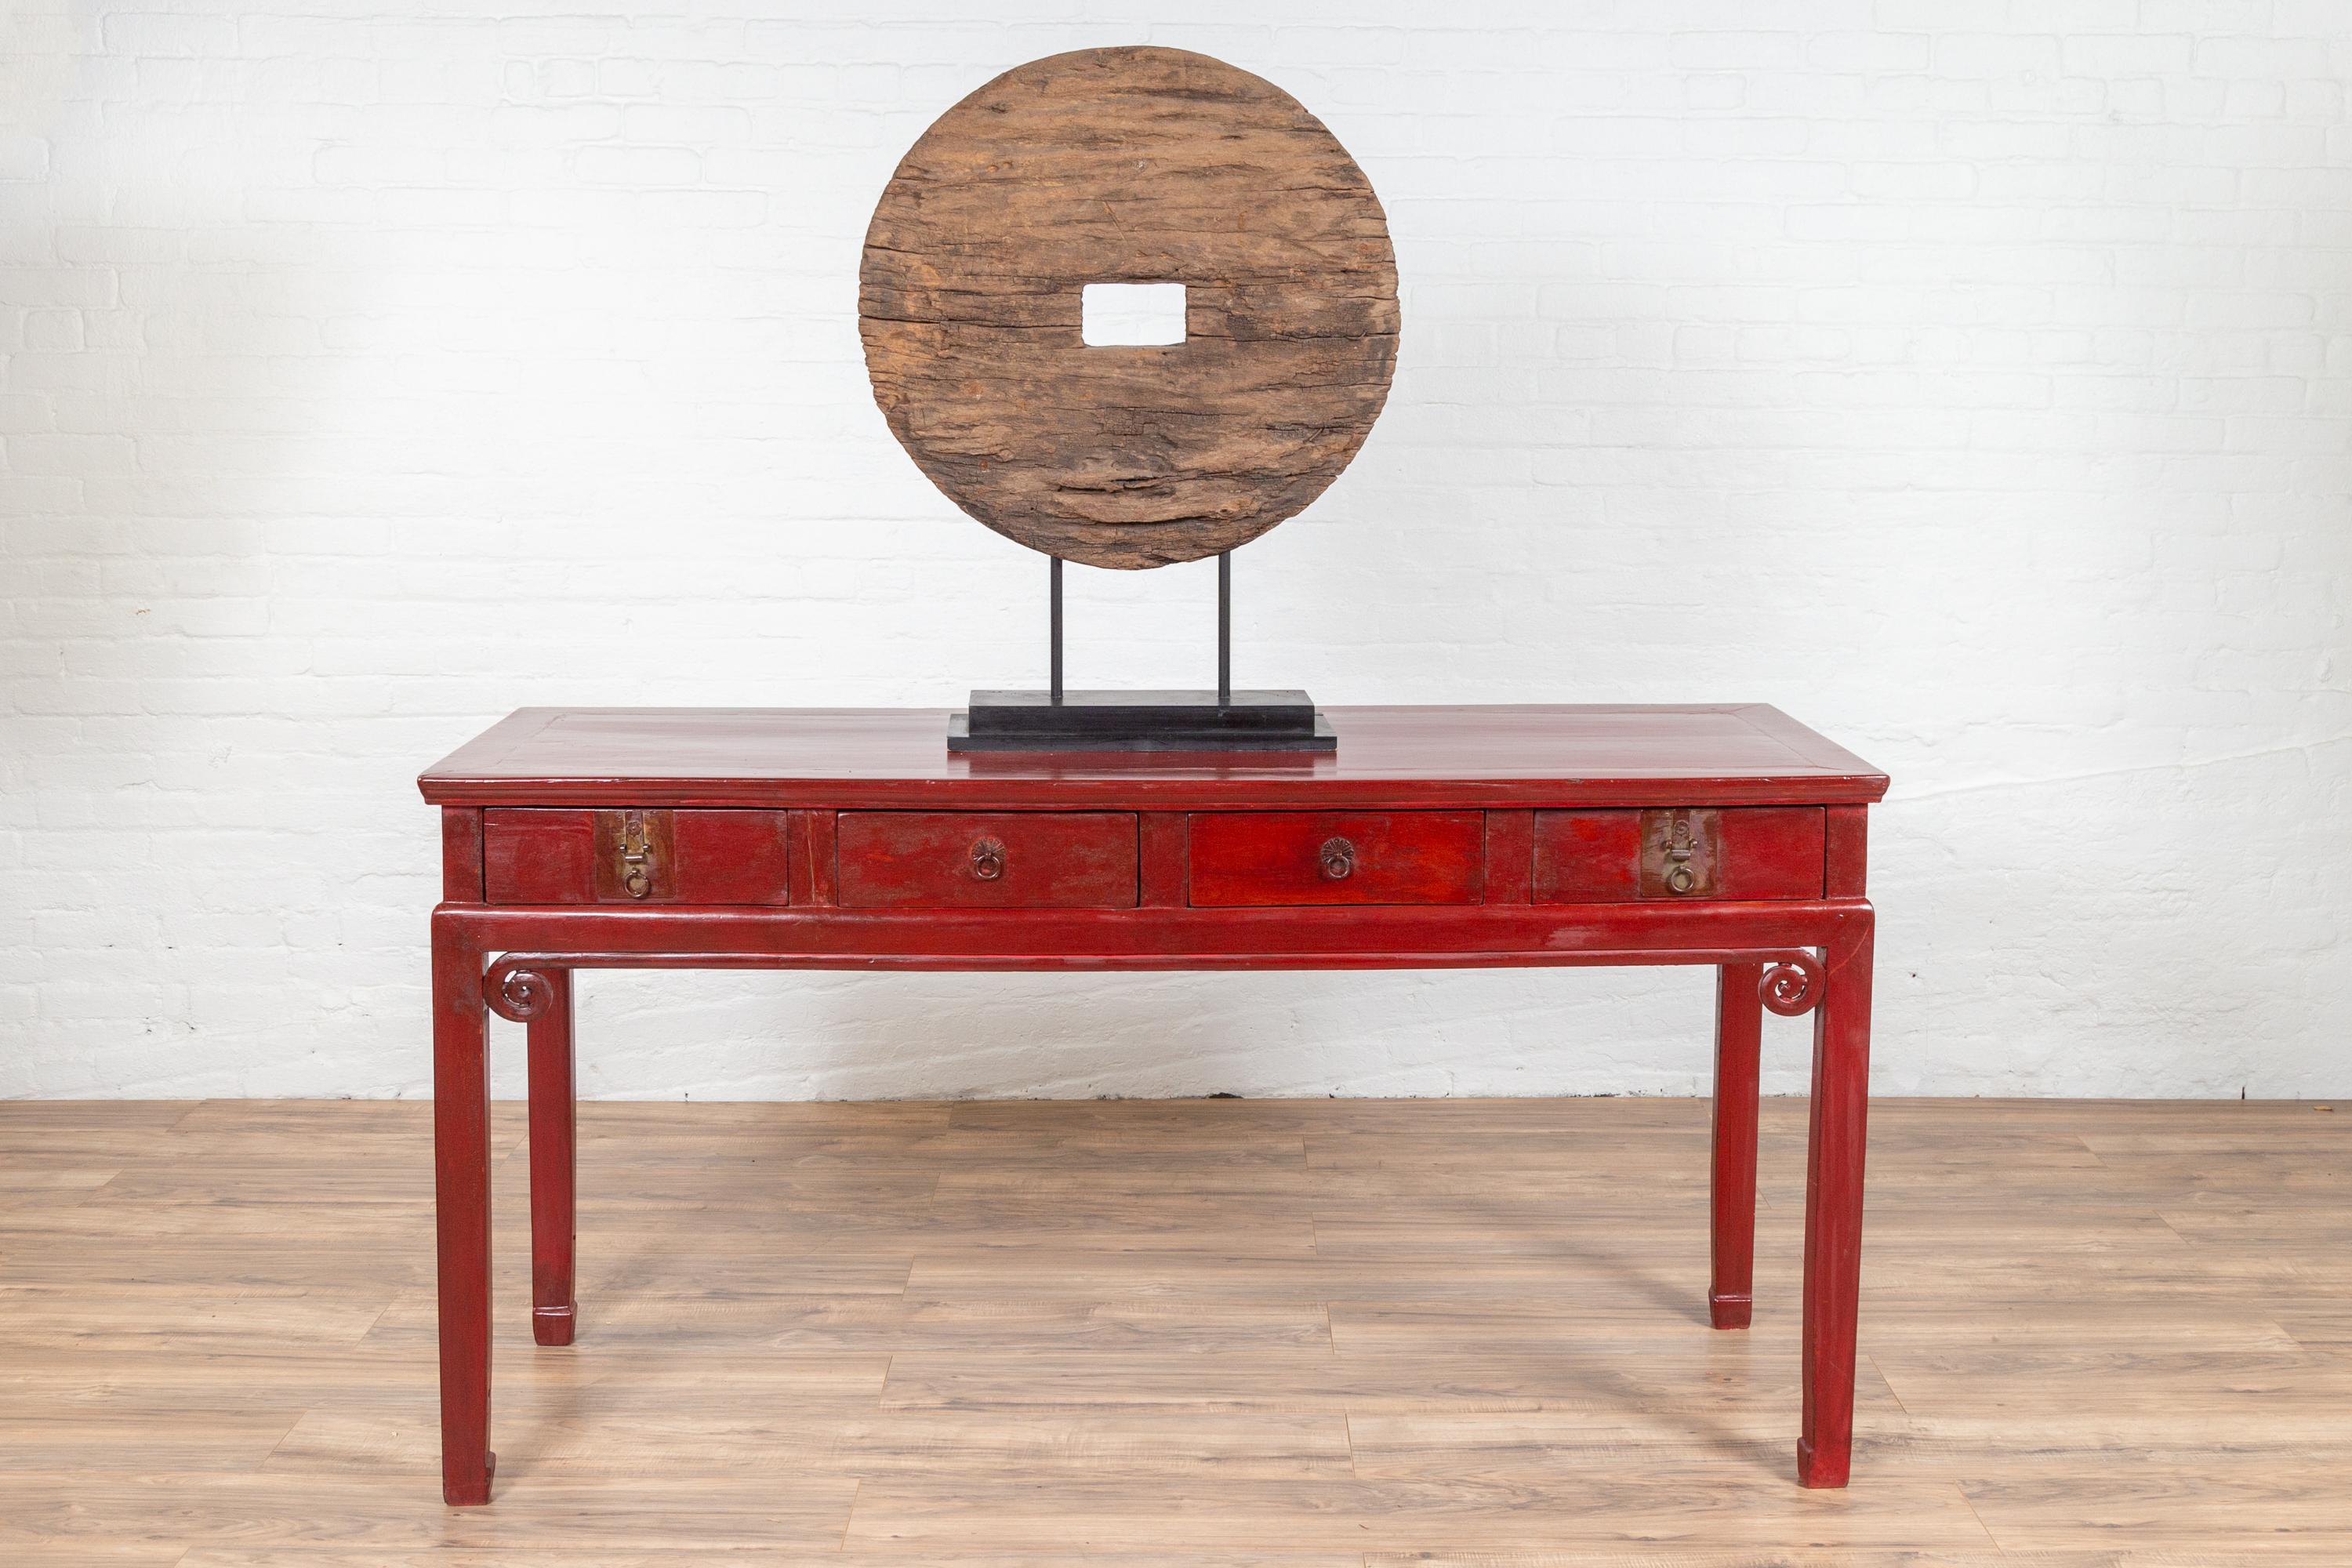 An antique Chinese red lacquer desk from the 20th century, with four drawers, curling scrolls and horse-hoof legs. Born in China in the years of the 20th century, this elegant desk grabs our attention with its deep red lacquered finish. Presenting a